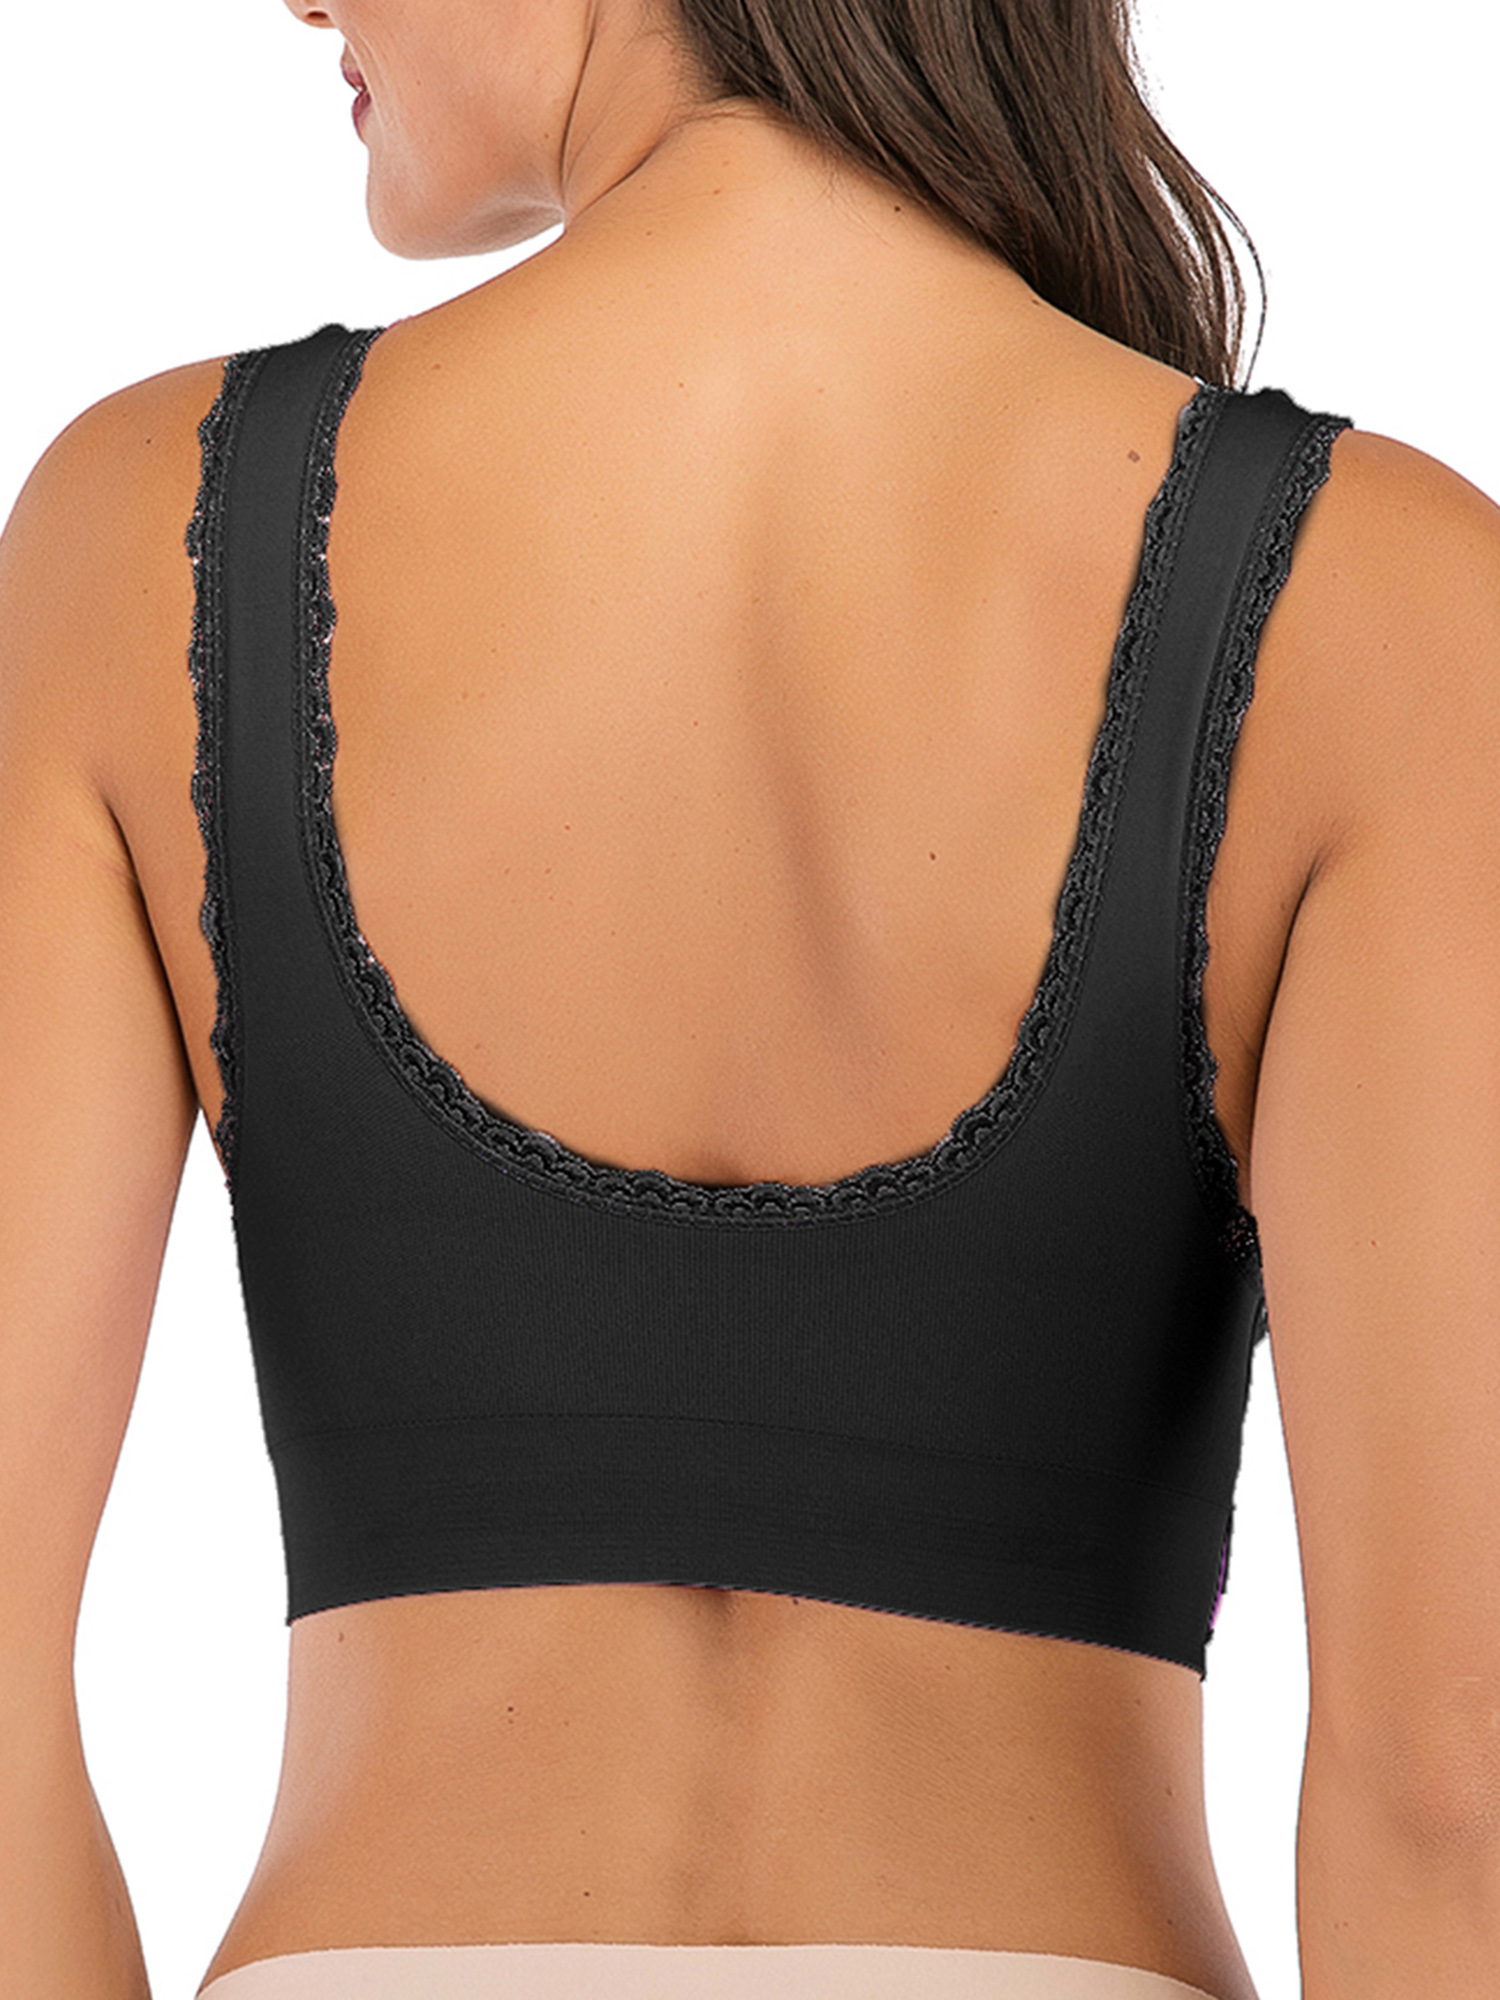 FUTATA Sports Bras For Women Padded Lace Front Buckle Lace Post Op Bras Seamless Yoga Bras Activewear Tops For Running Workout Gym,1/3 Pack - image 5 of 6